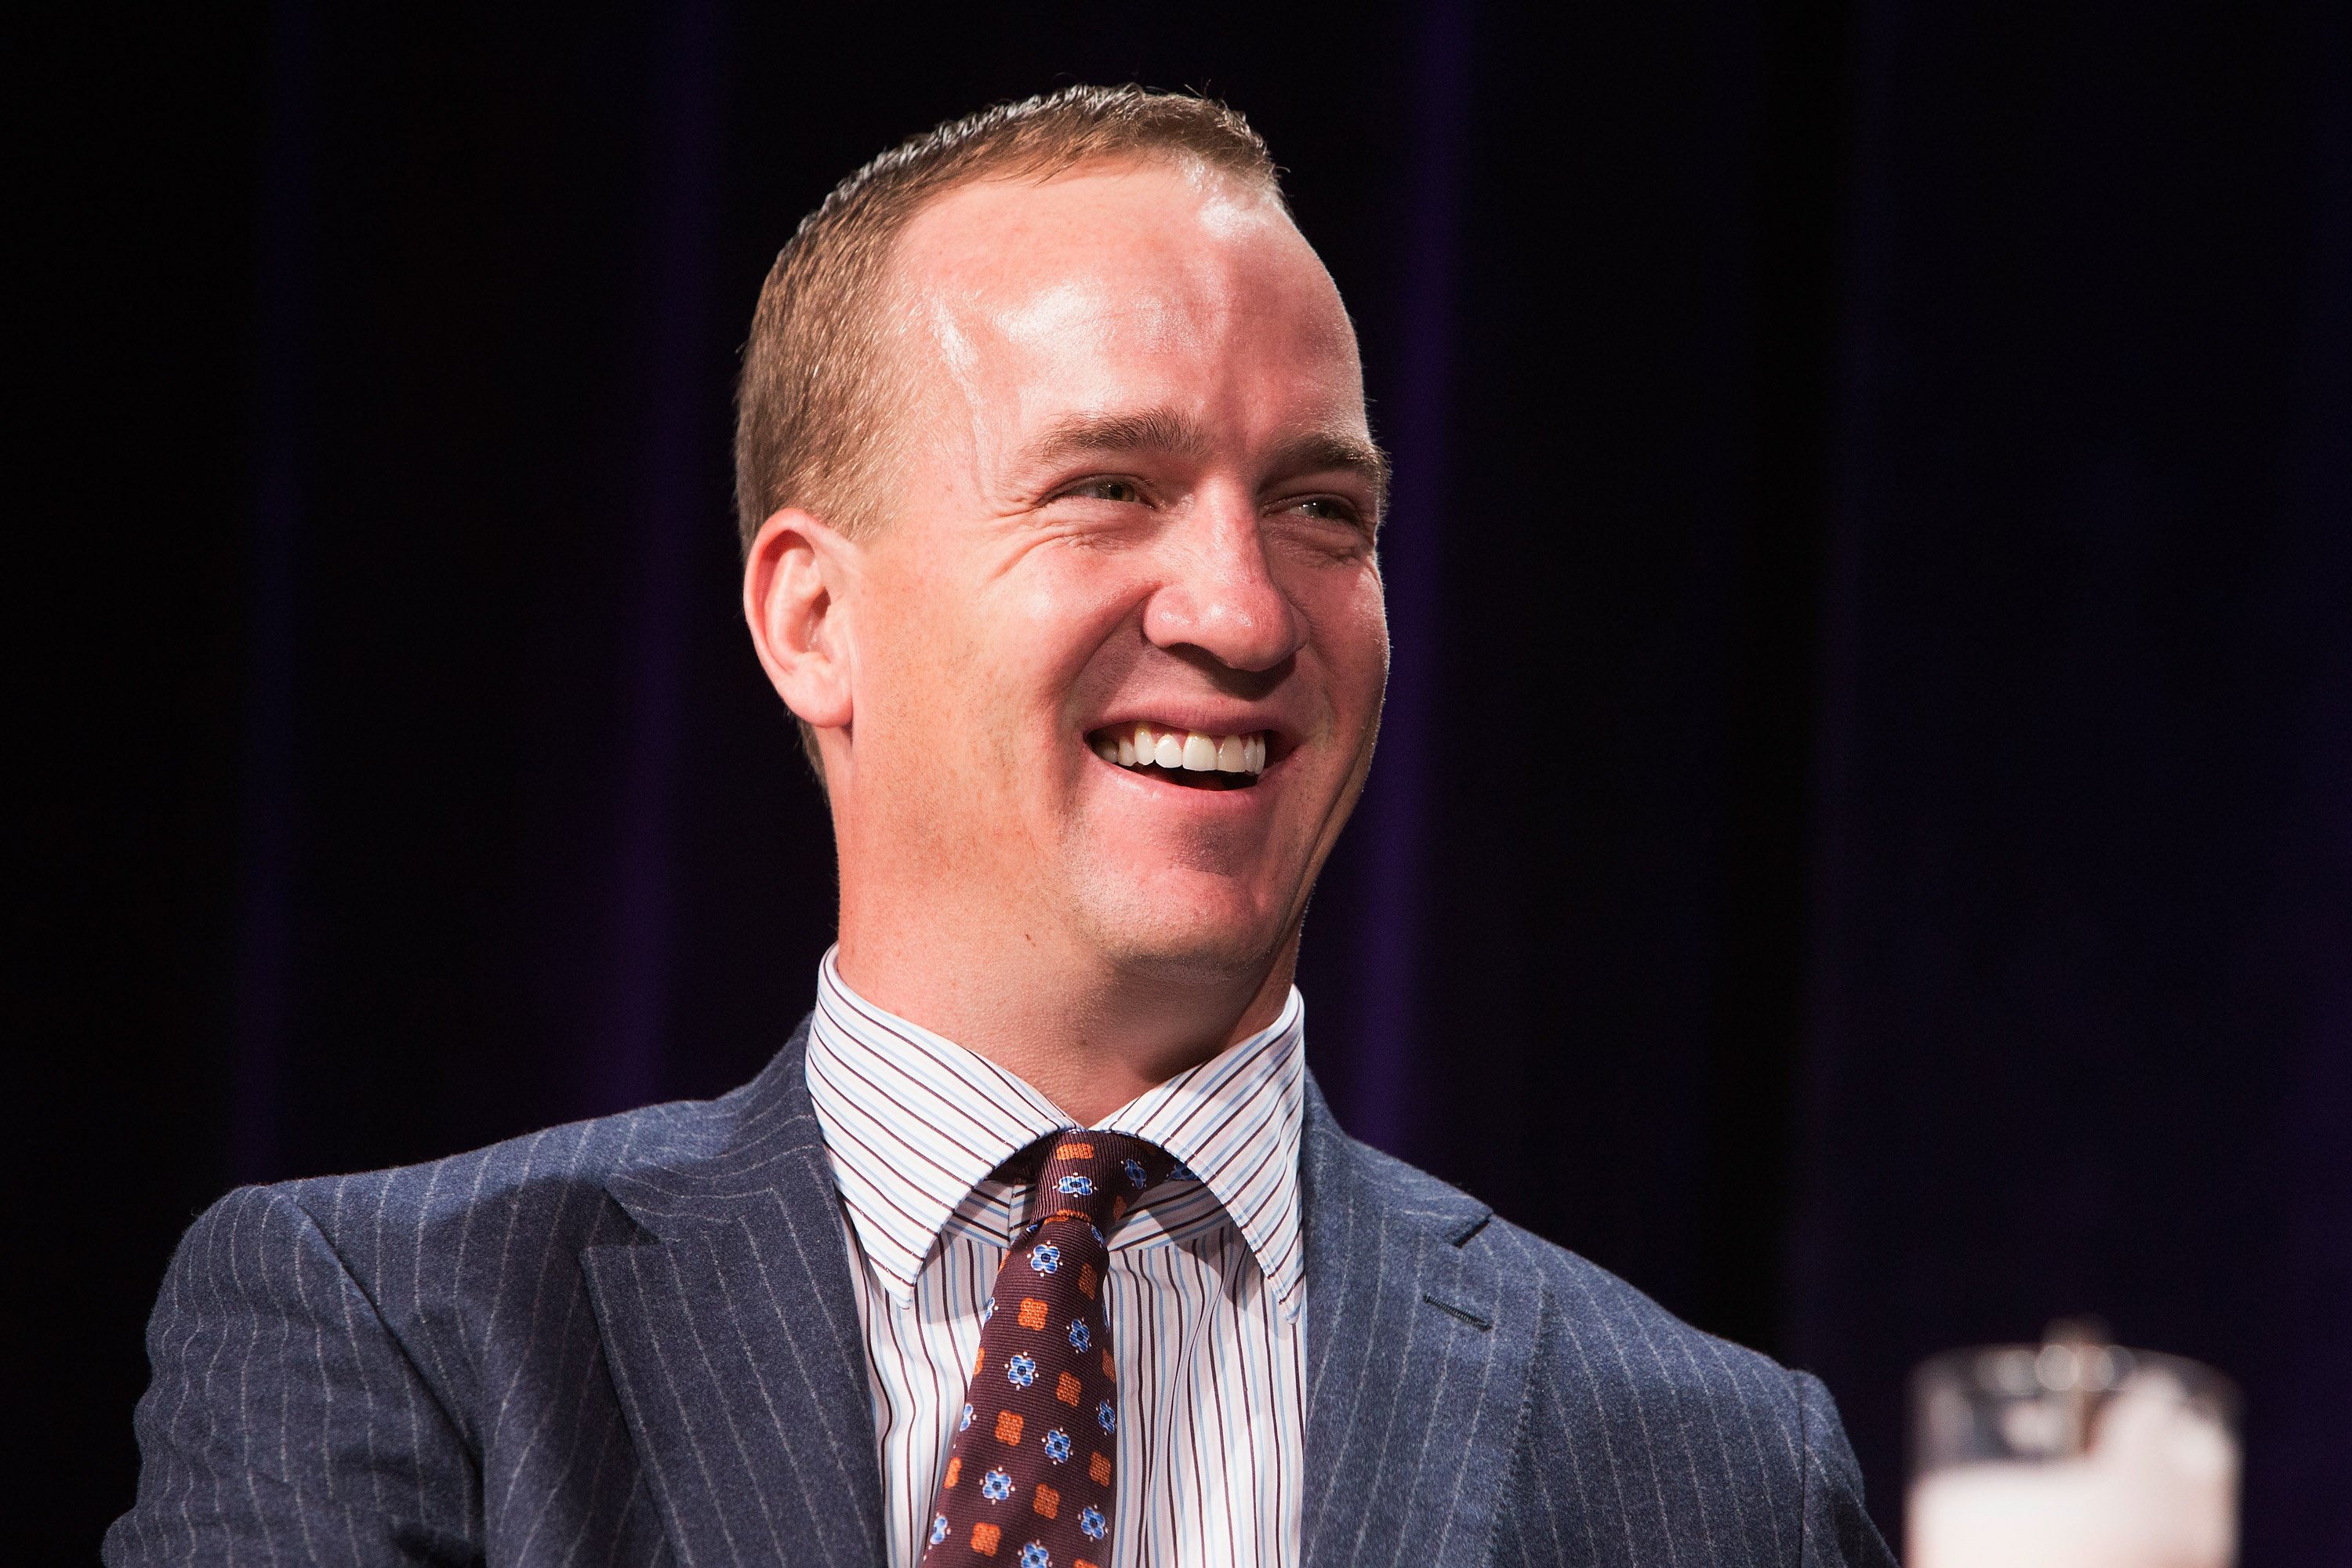 Peyton Manning attends the SuperBowl Breakfast where he received the Bart Starr award at JW Marriott Desert Ridge Resort & Spa on January 30, 2015 in Phoenix